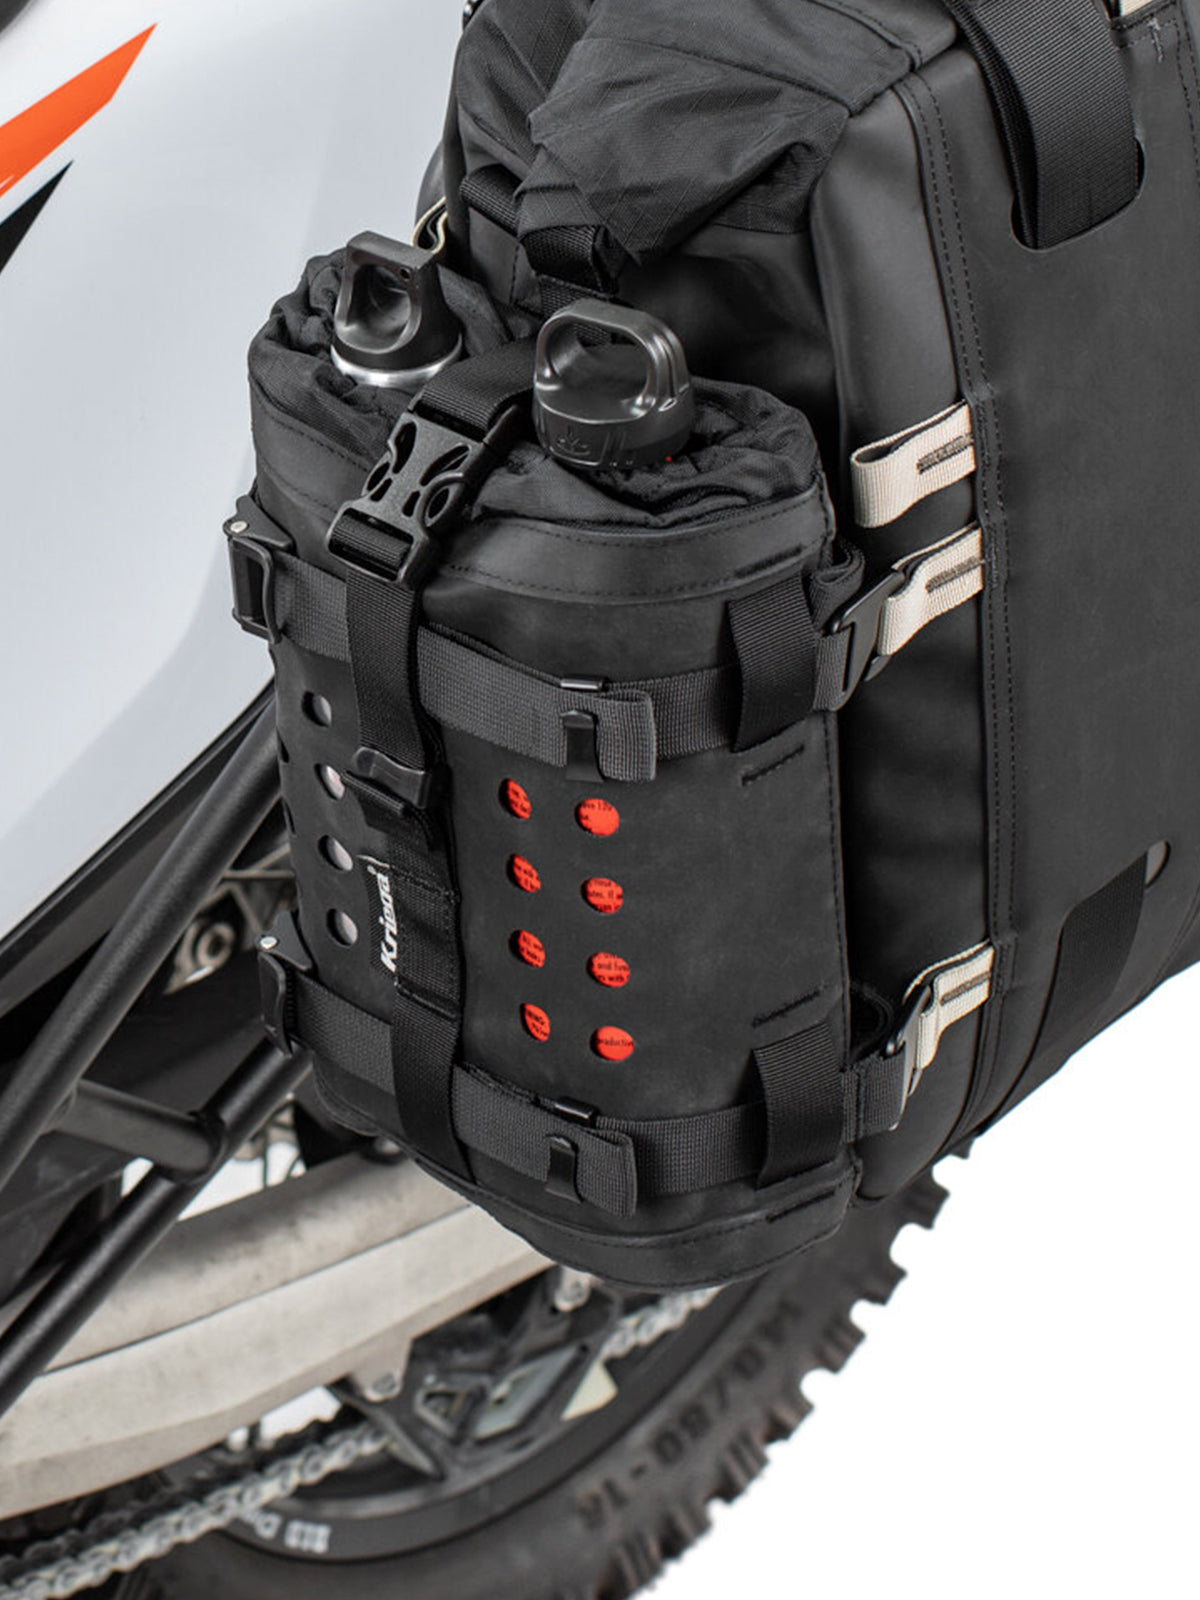 Kriega OS Bottle fitted to panniers